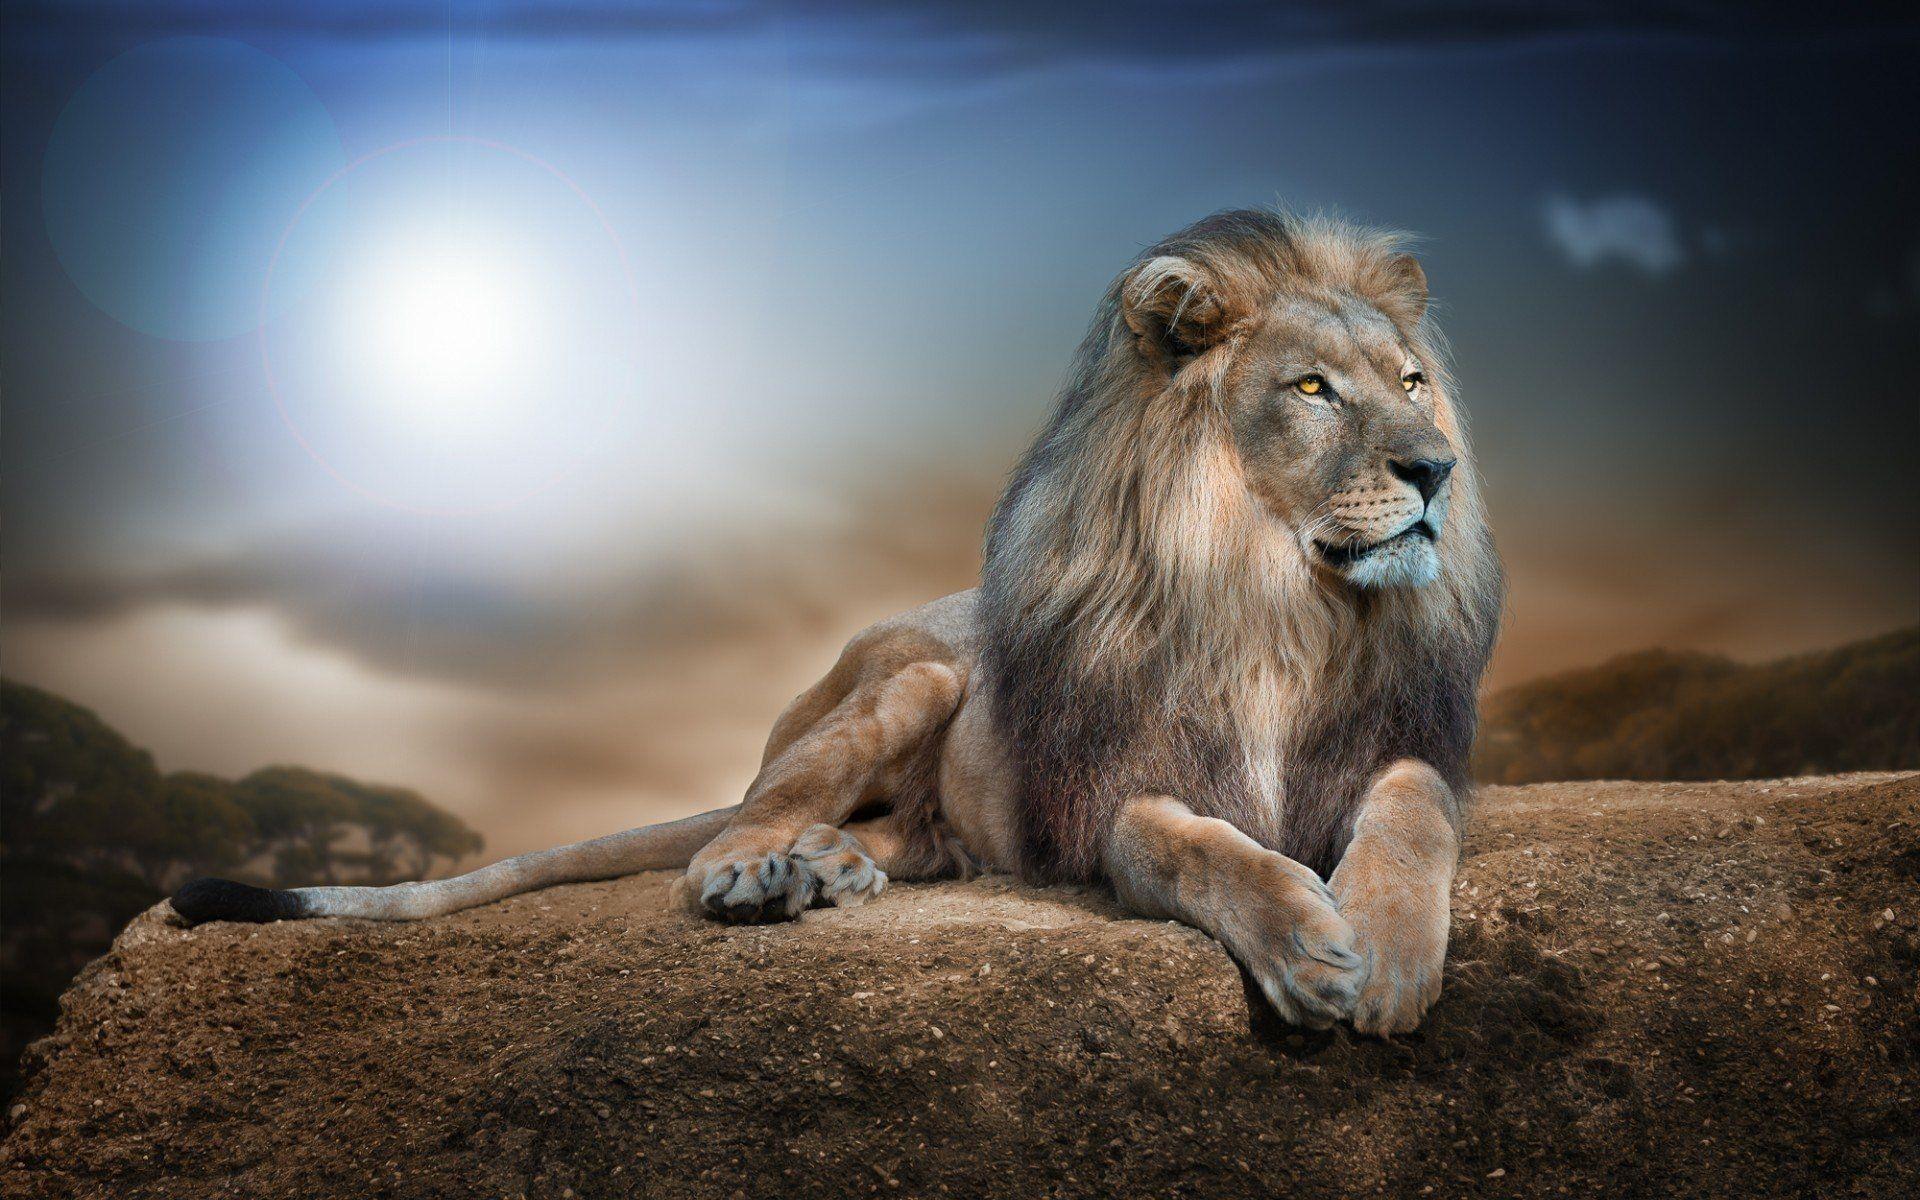 Lion HD Wallpaper and Background Image